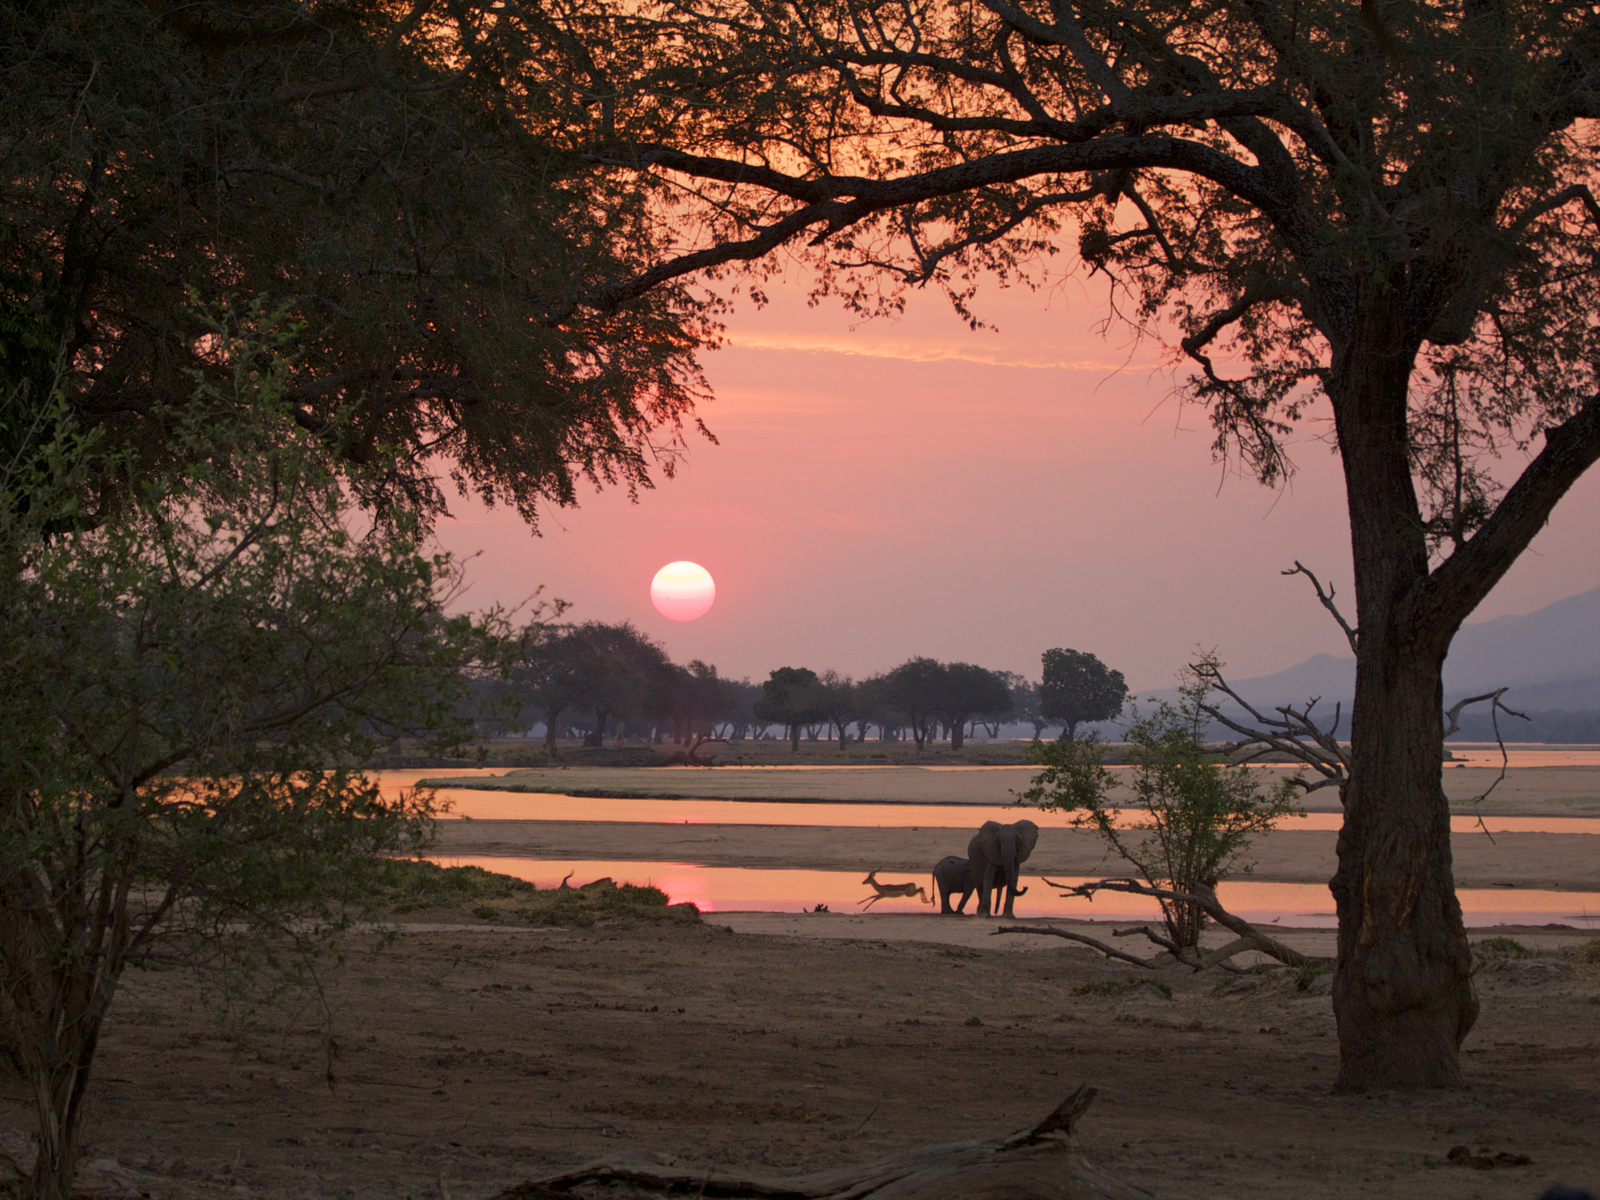 Sunset at the Mana Pools National Park, one of Africa's best safaris